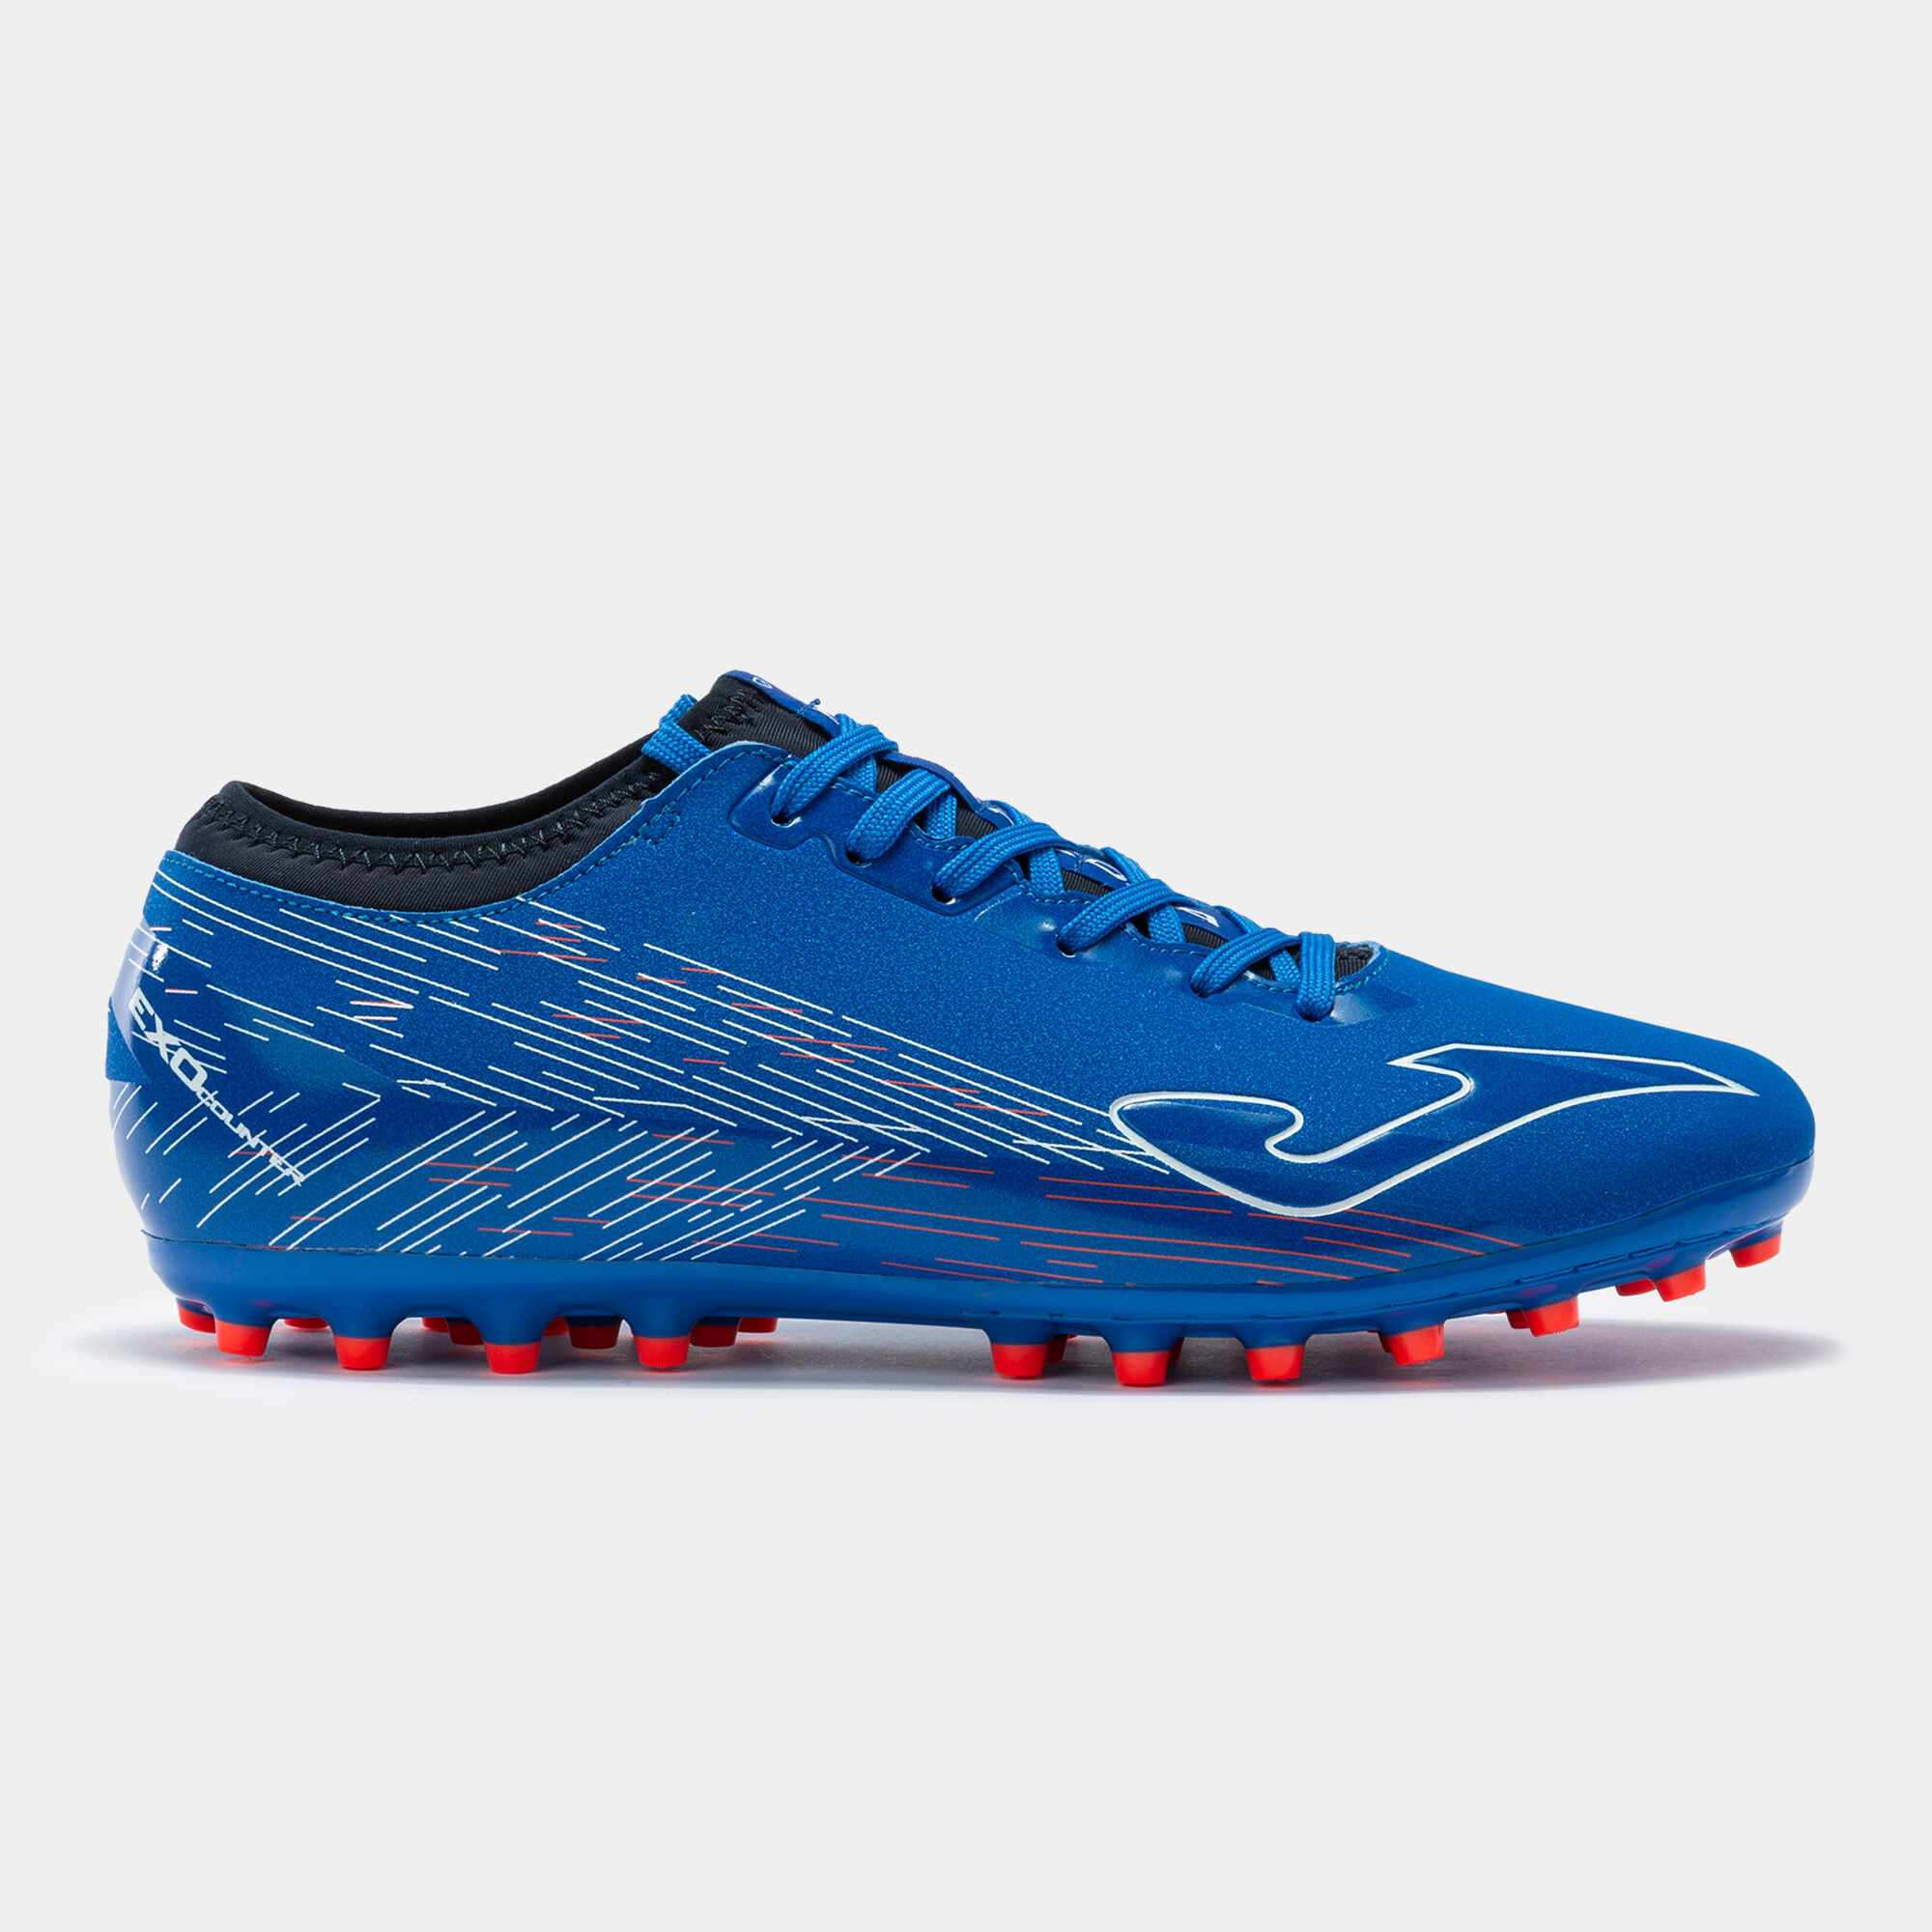 FOOTBALL BOOTS SUPERCOPA 22 FIRM GROUND FG ROYAL BLUE